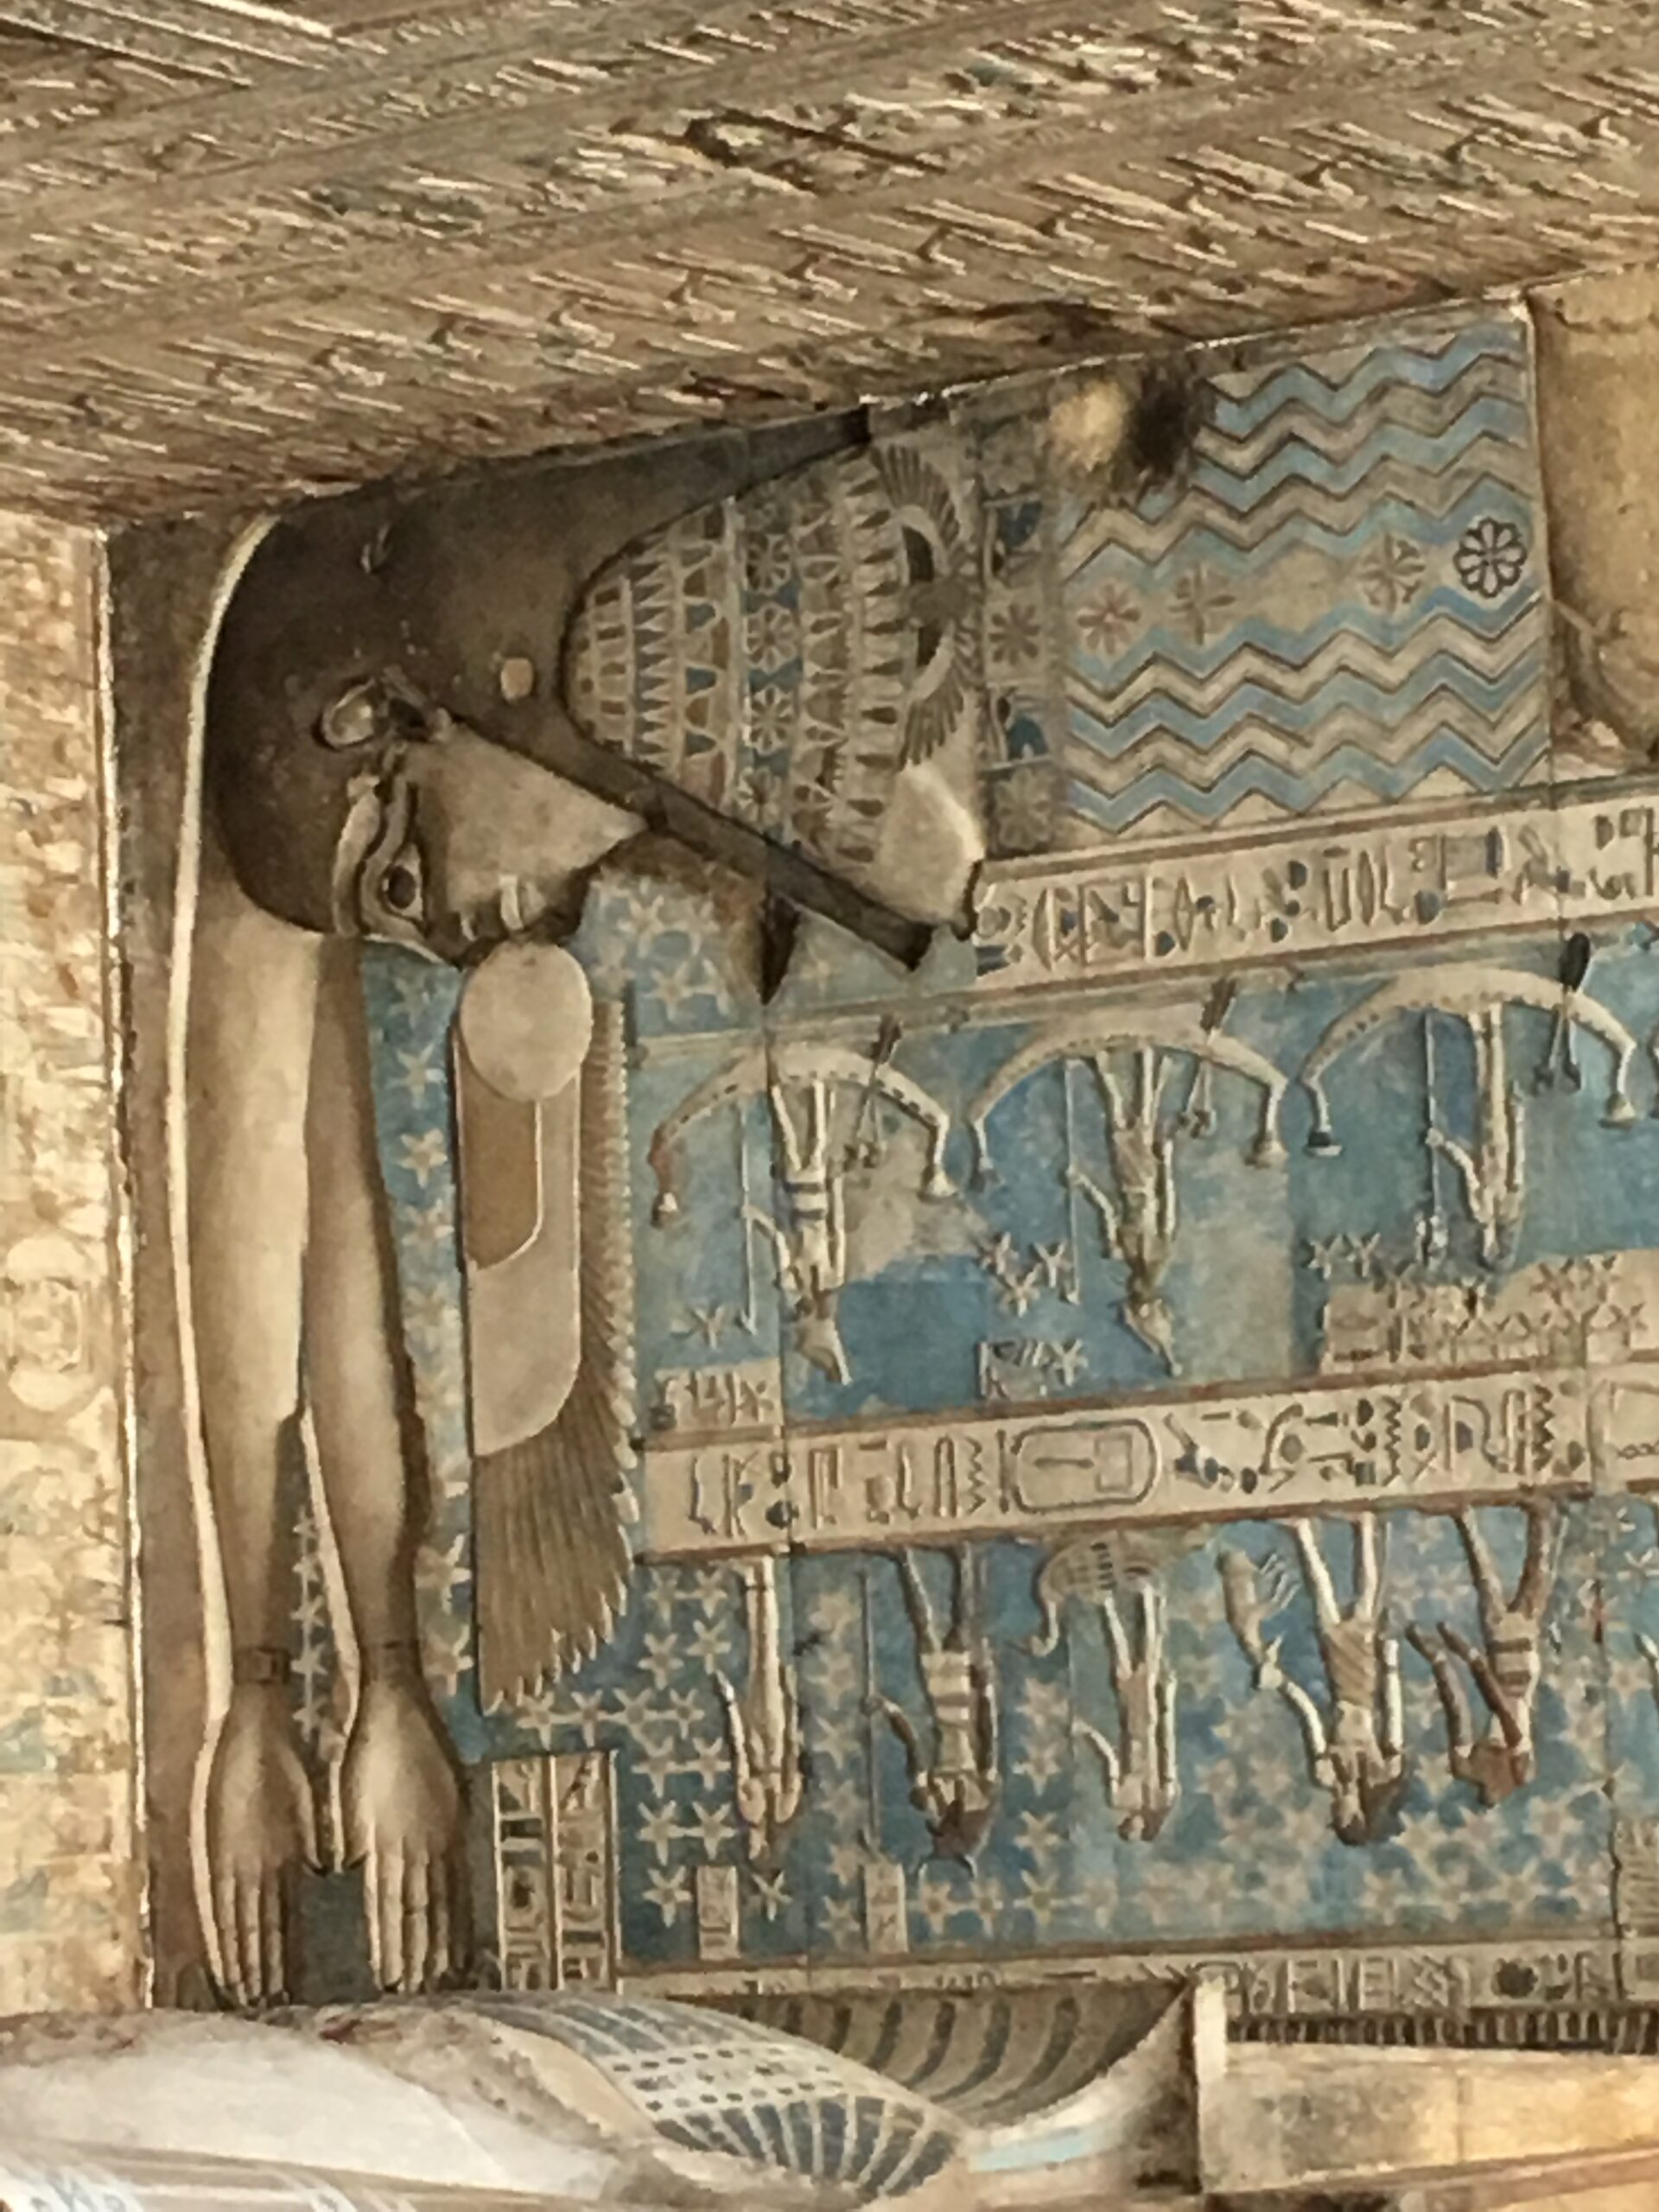 Goddess Nut swallowing the sun - as depicted on Hypostyle Hall ceiling Denderah Temple